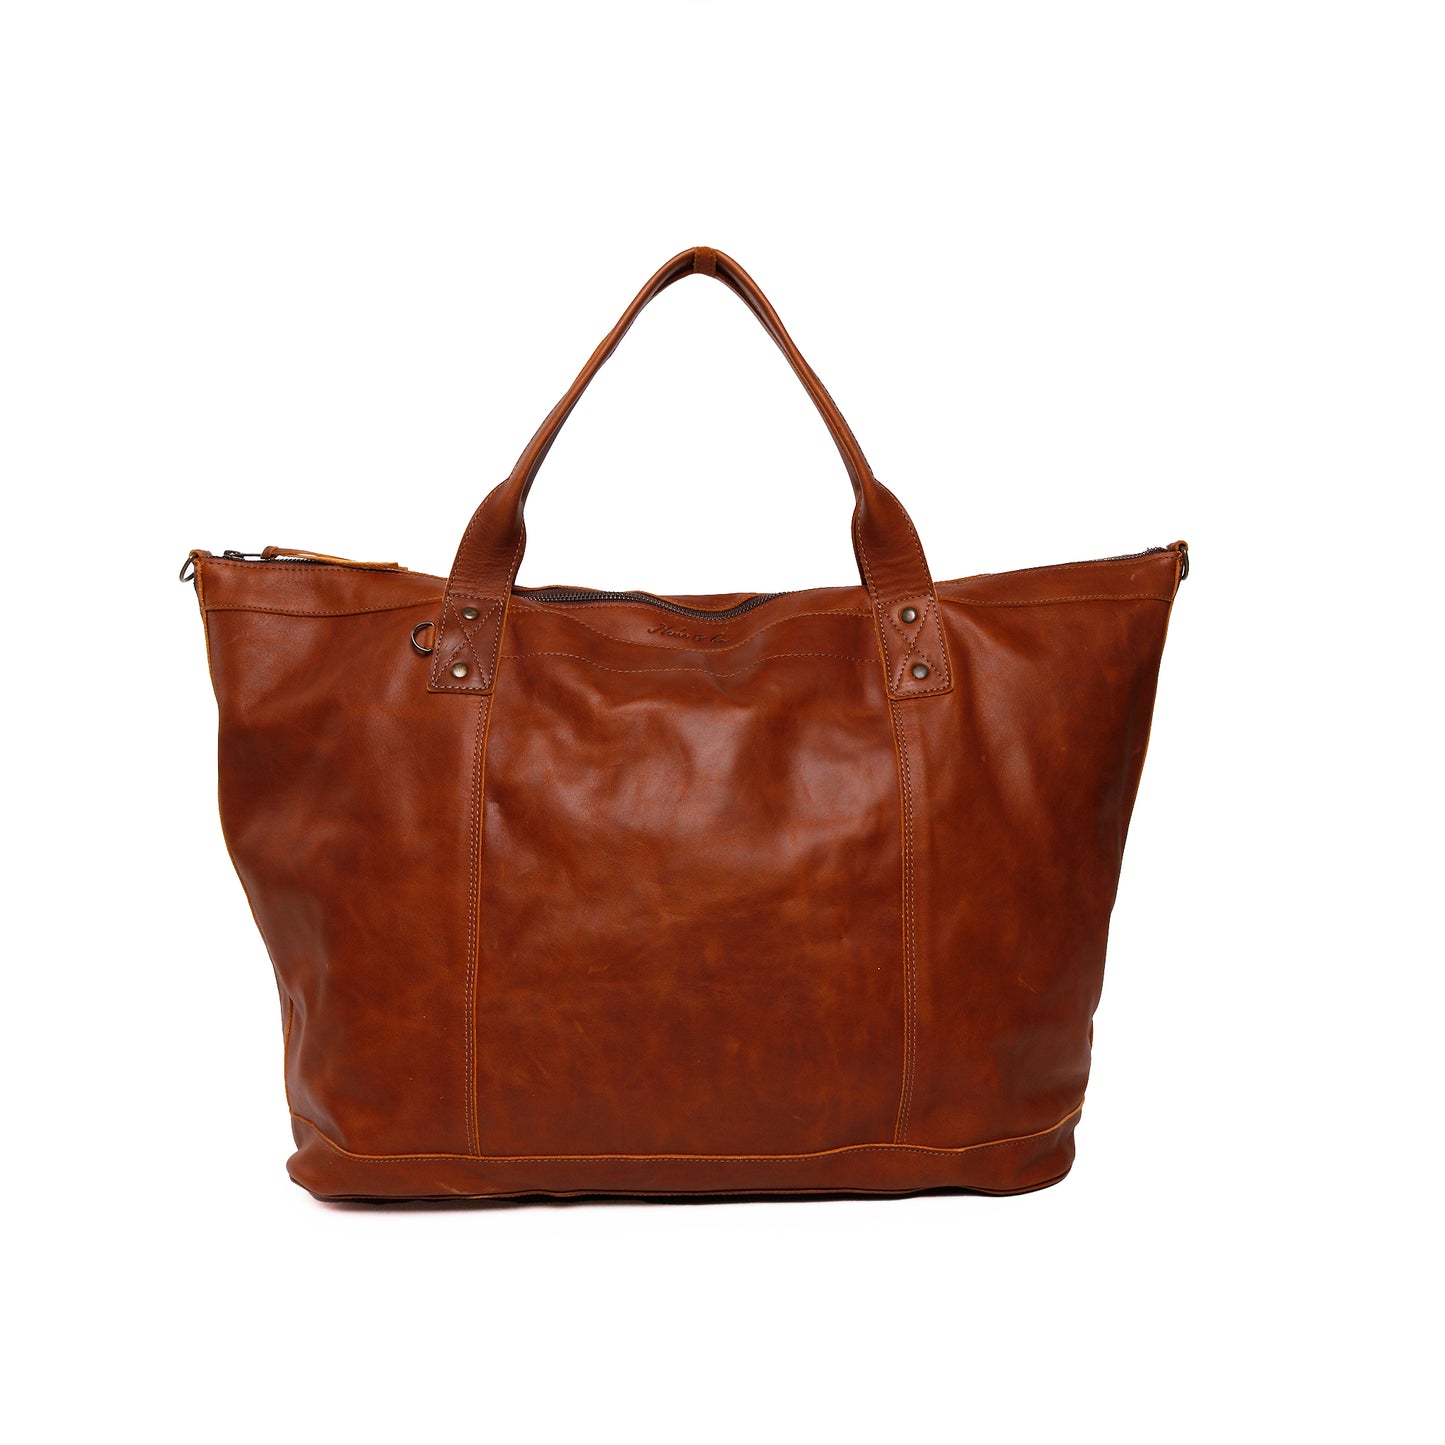 PERFECT WEEKENDER - FULL LEATHER - CAFE